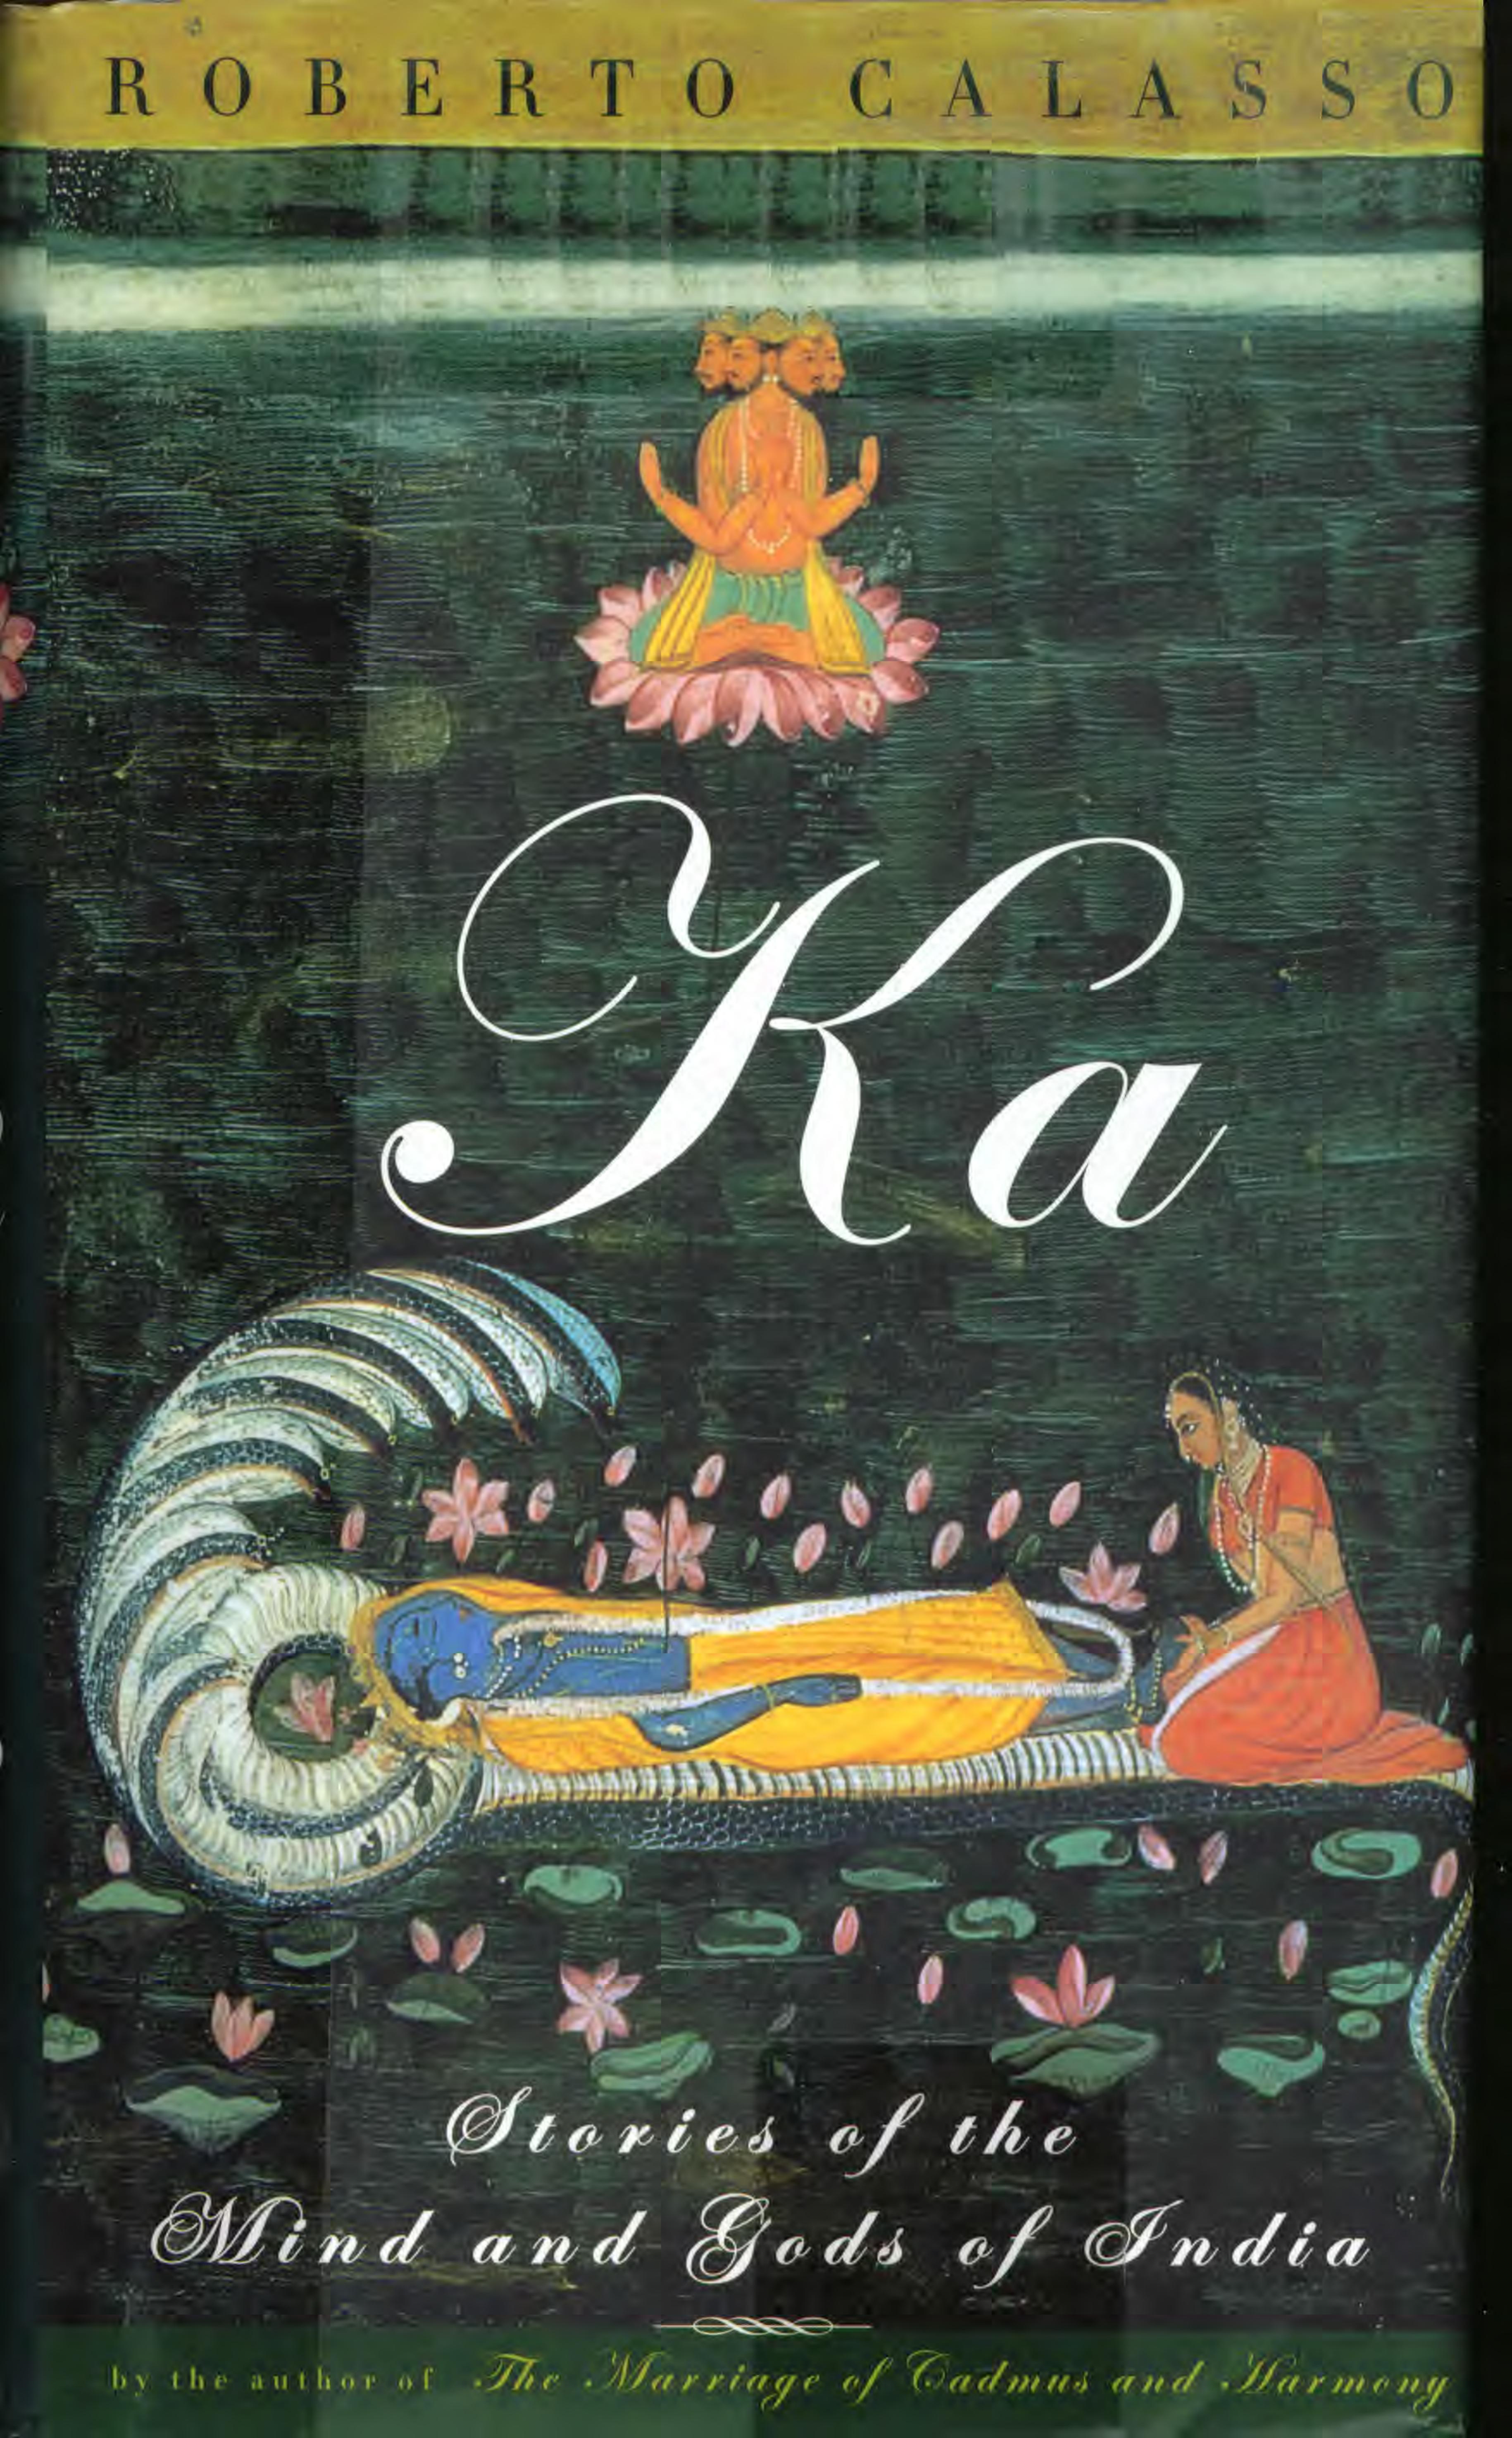 Ka: Stories of the Mind and Gods of India by Roberto Calasso